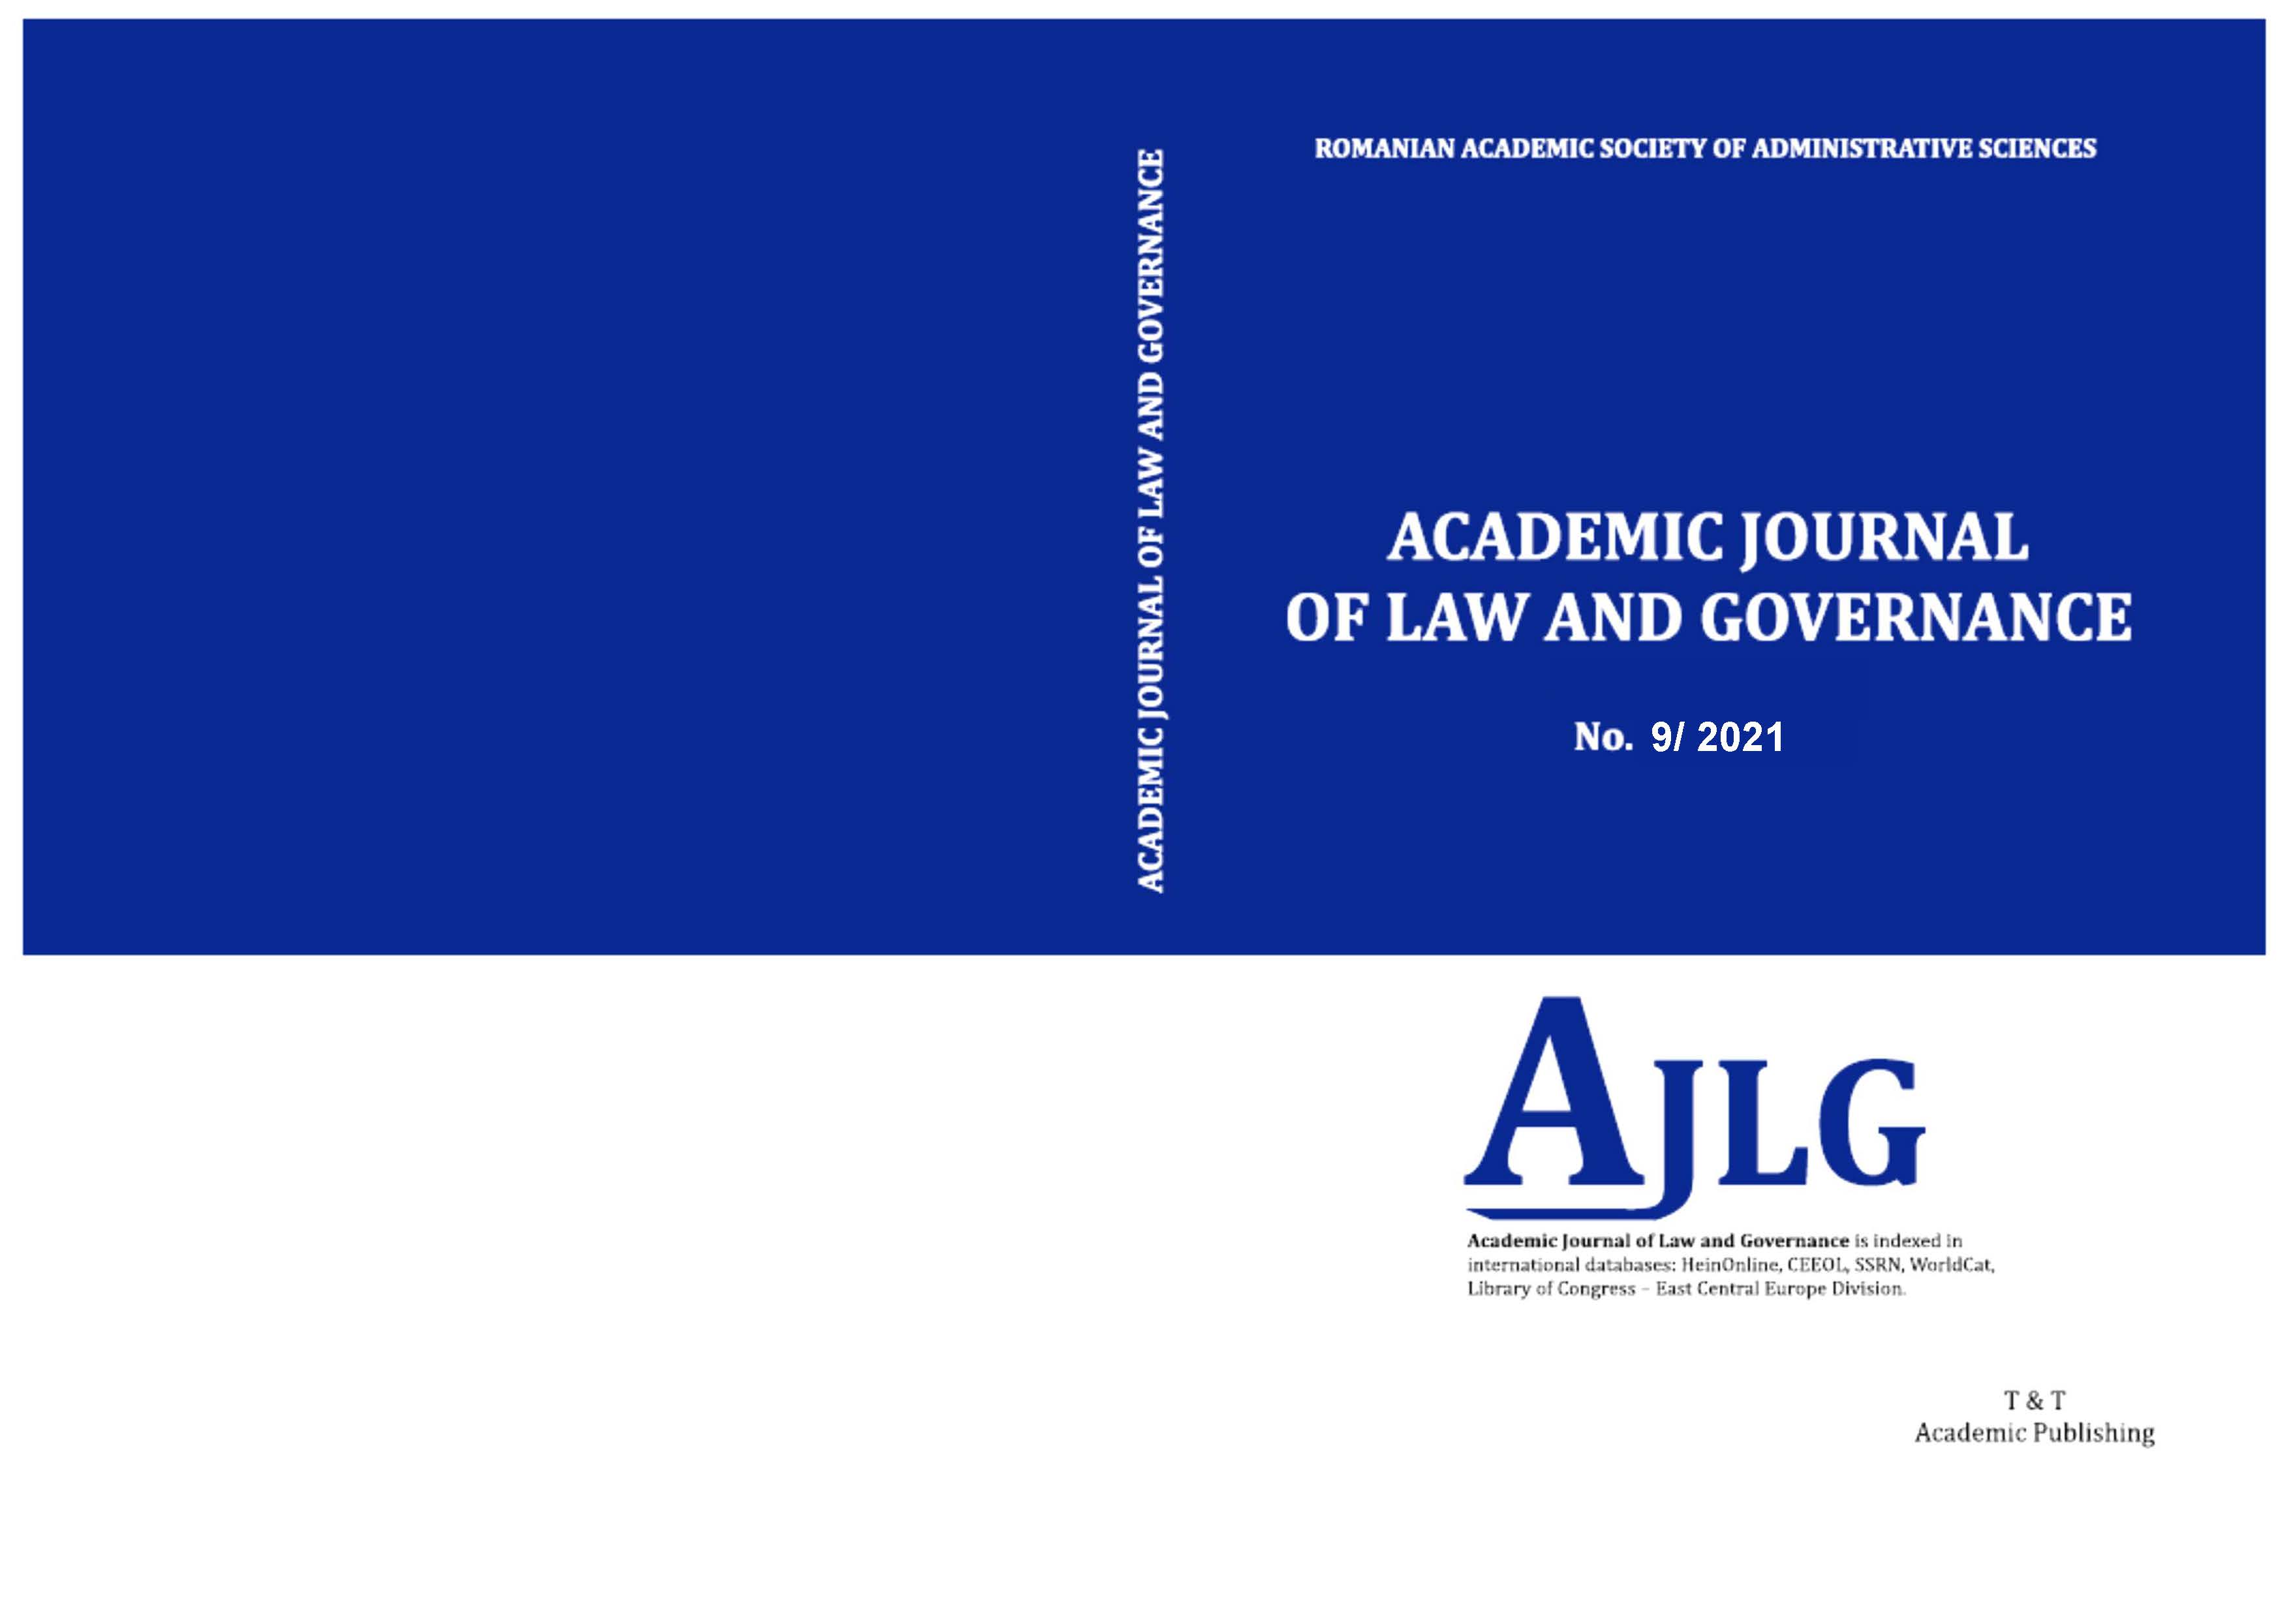 Ioan Alexandru, 2019, Despre sacralitatea justiției/About the Sacredness of Justice, Bucharest: the Publishing House of the Romanian Academy Cover Image